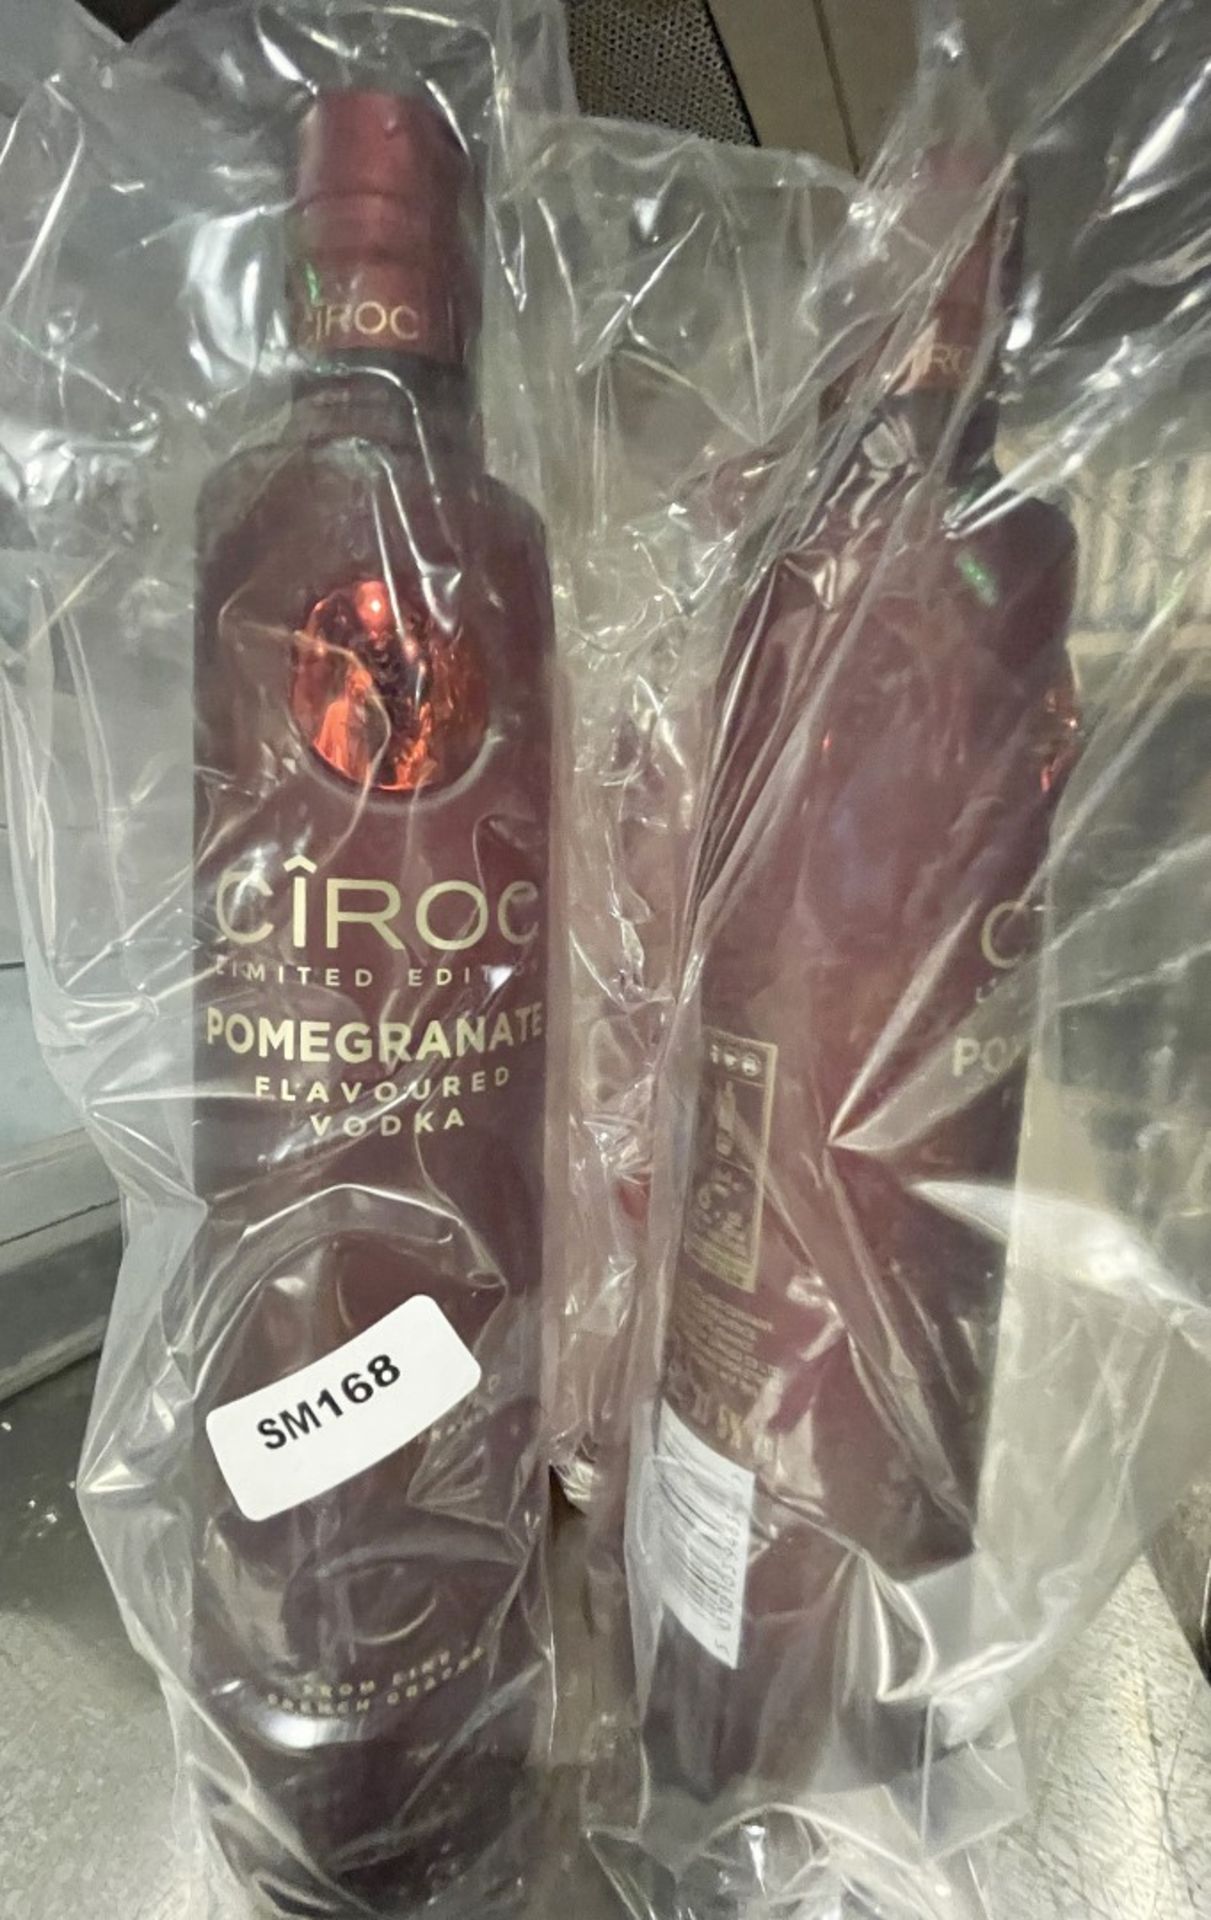 4 x Limited Edition 70cl Bottles of Ciroc Pomegranate Flavoured 37.5% Vodka - New Unopened Bottles